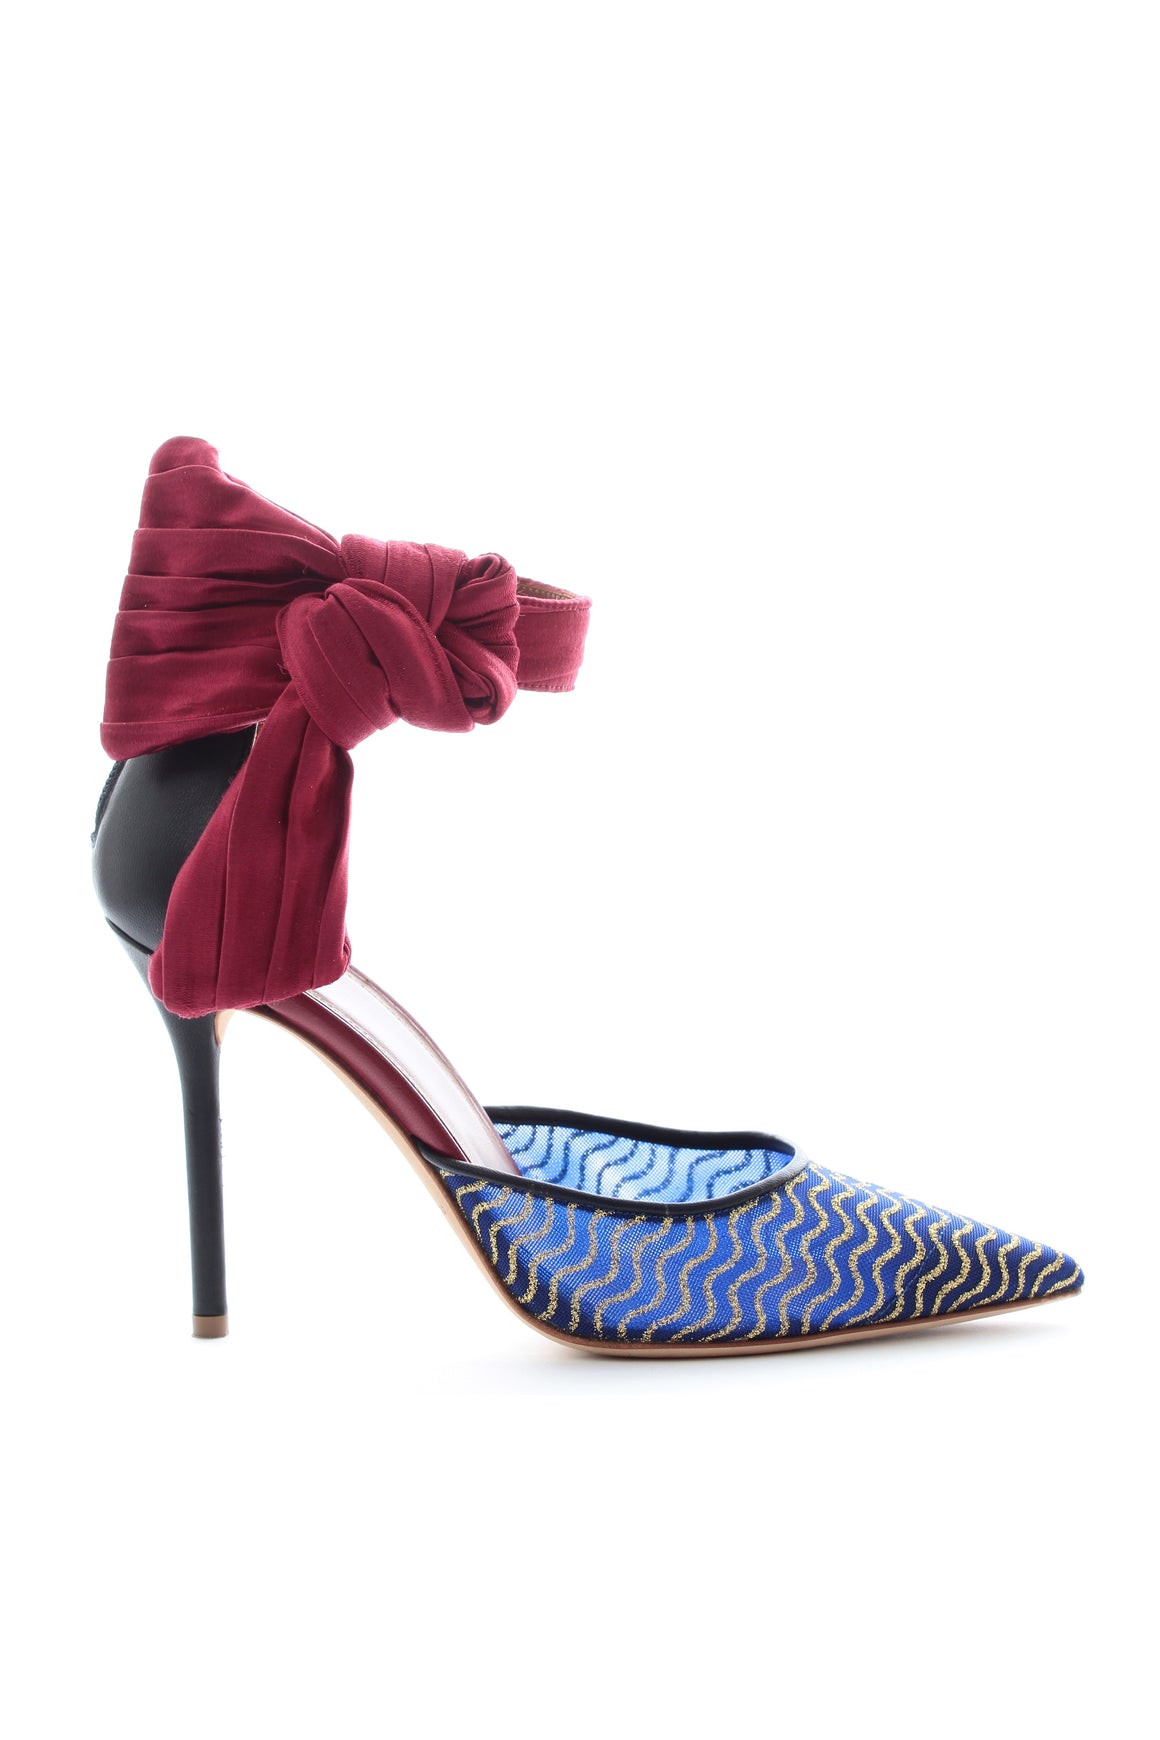 Malone Souliers x Emanuel Ungaro Elle 100 Satin-Trimmed Glittered Mesh and Leather Pumps